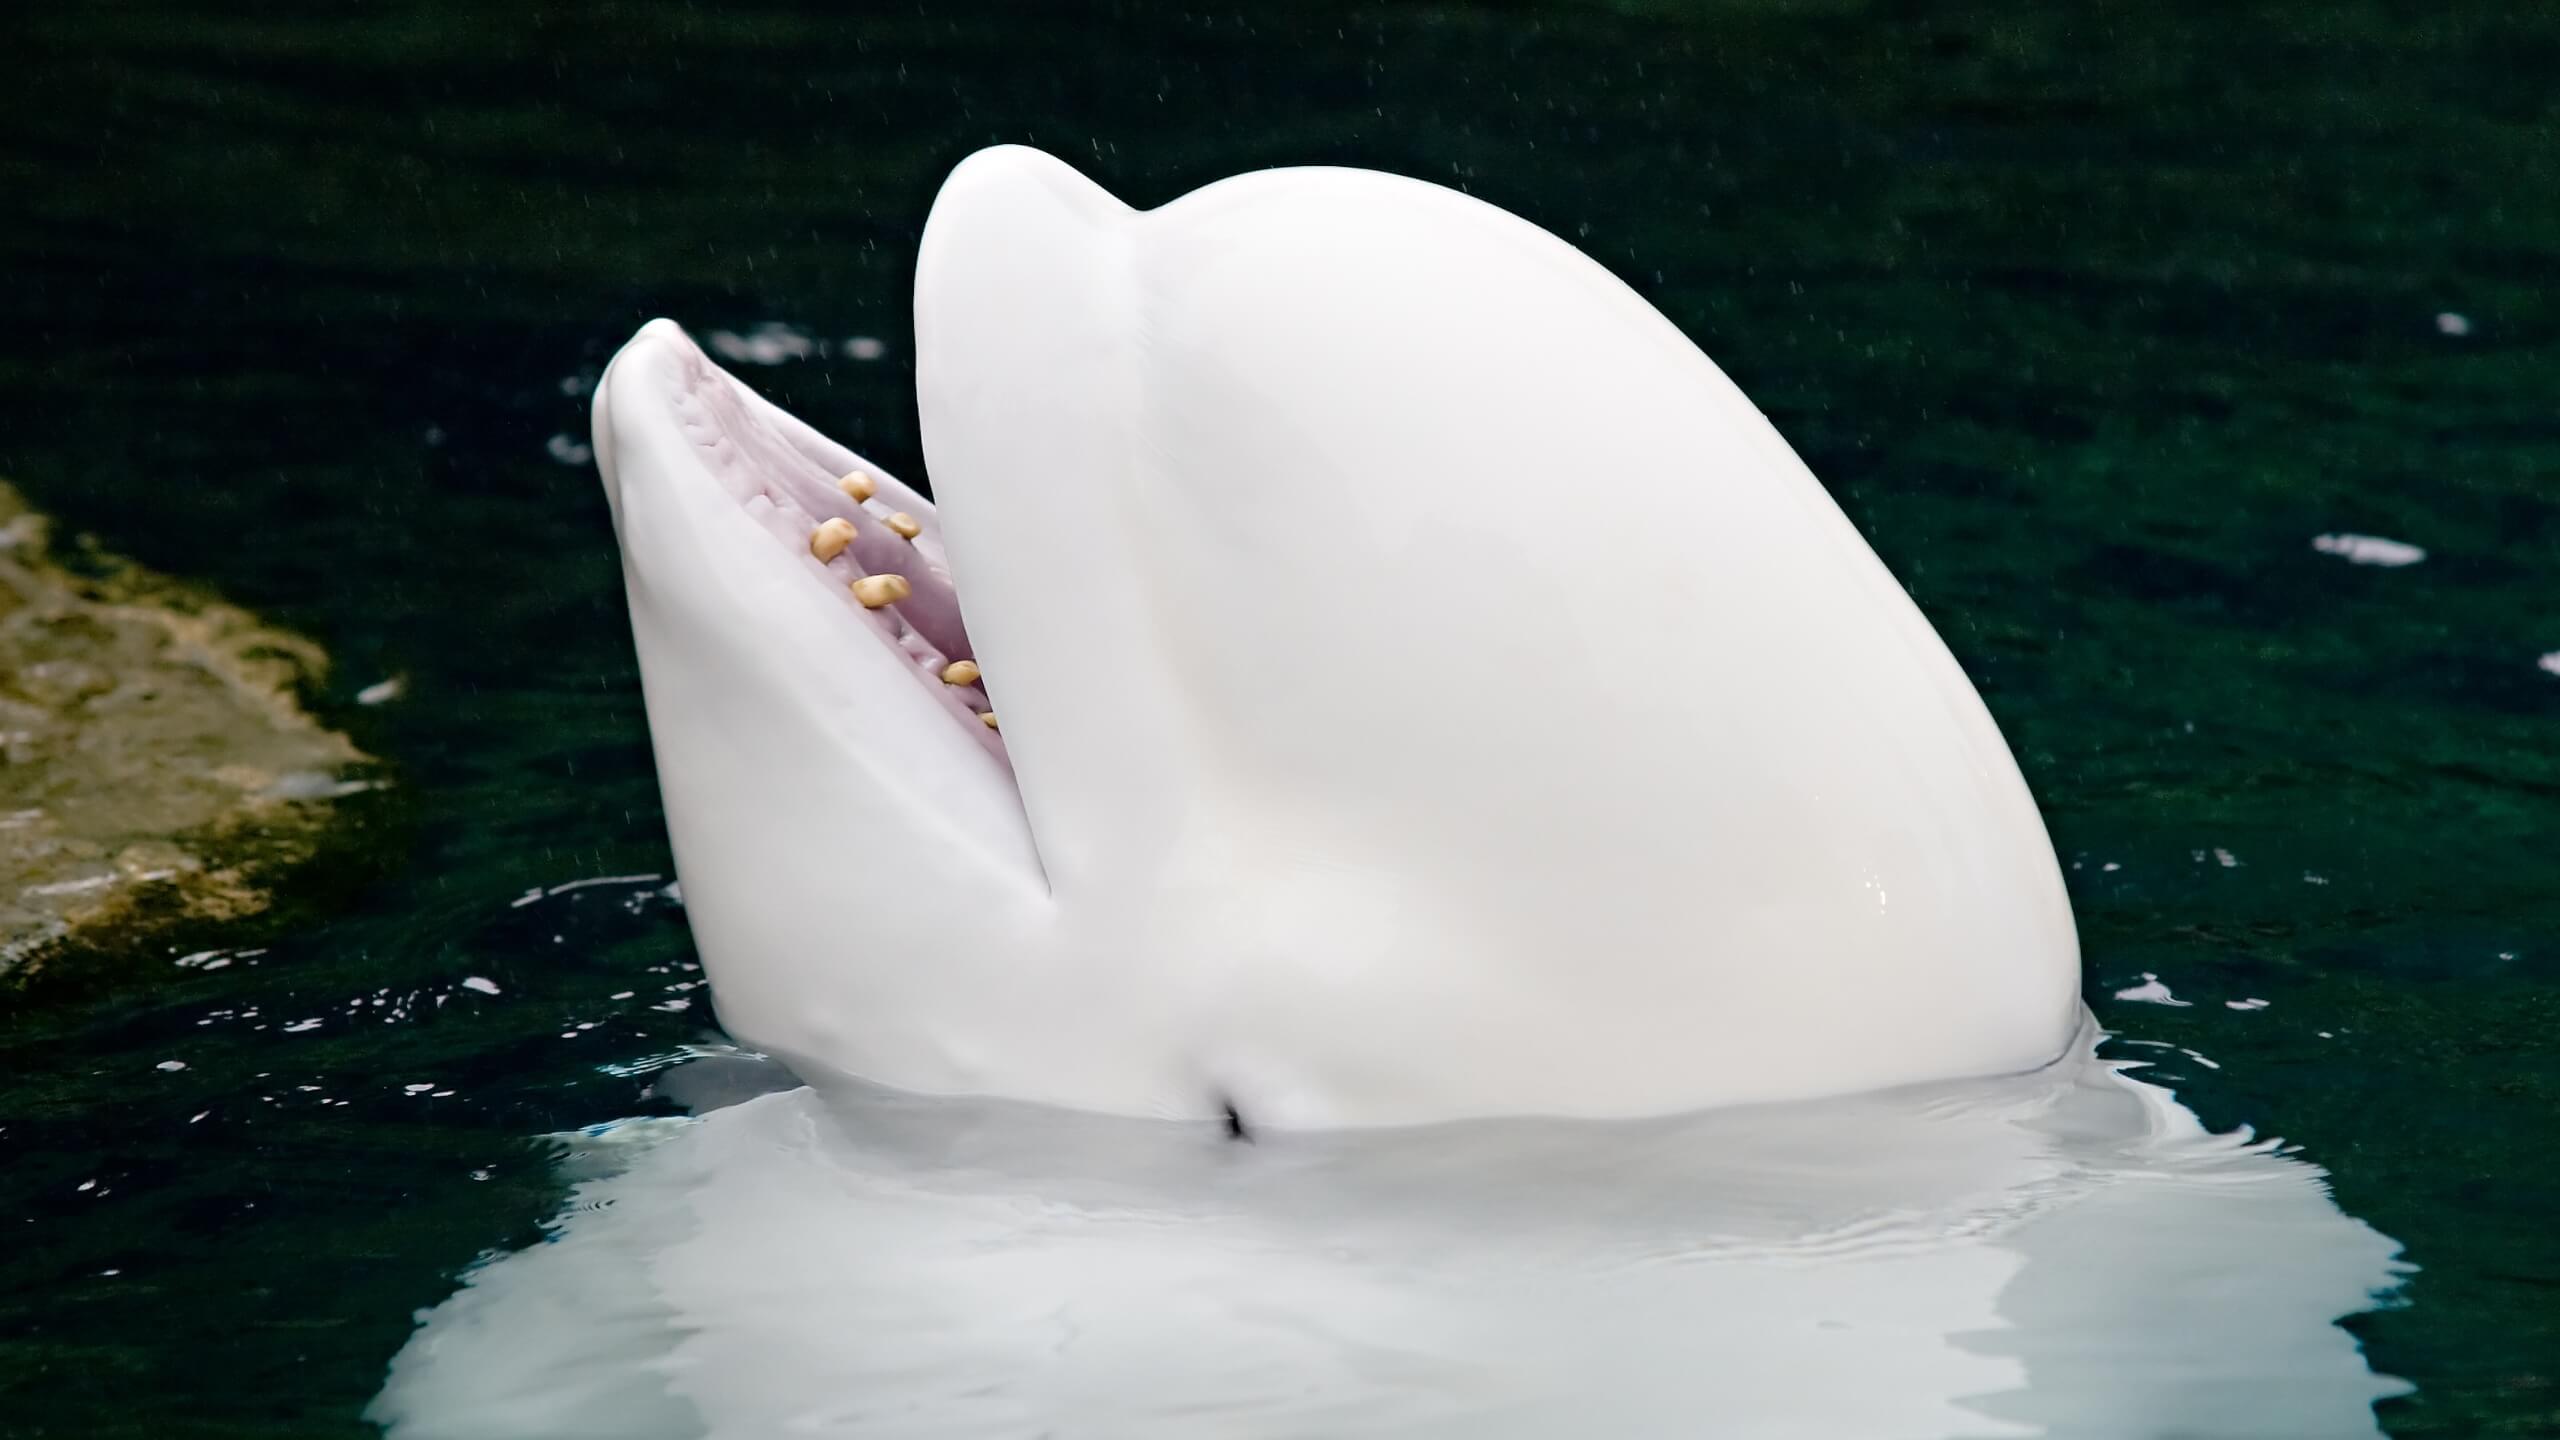 Moreover, belugas are smart enough for the development of unique behaviors in captivity such as tool use and cooperative hunting techniques.